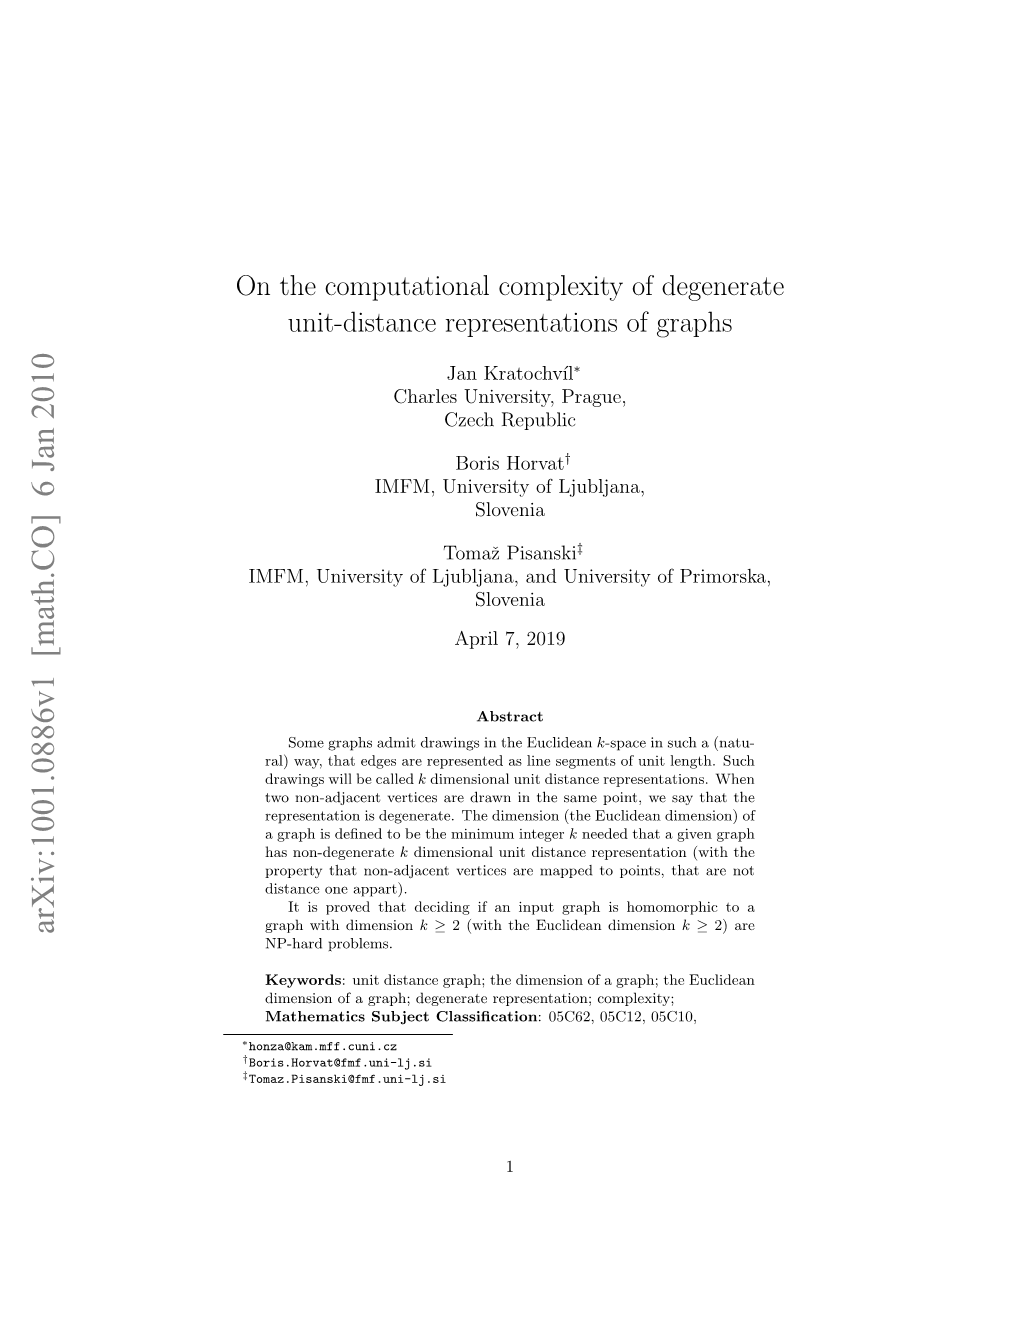 On the Computational Complexity of Degenerate Unit Distance